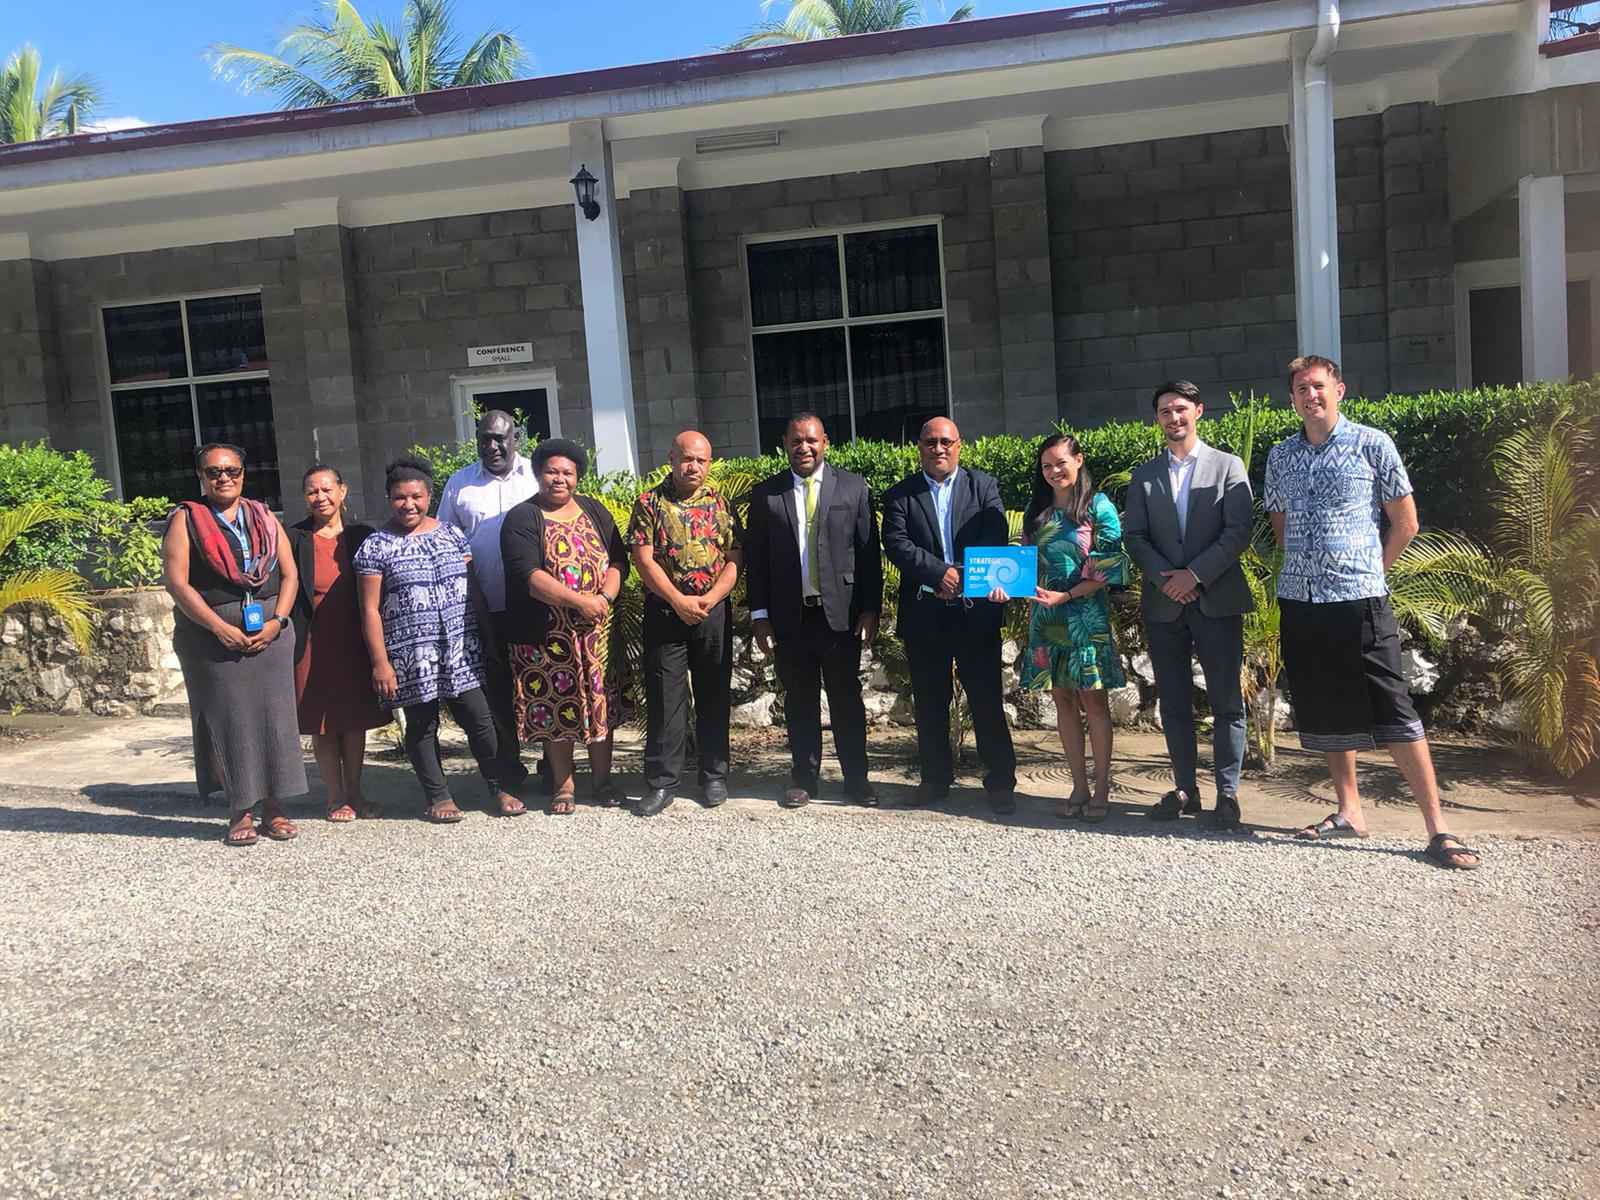 SPC provides technical support PNG to establish their Human Rights Commission